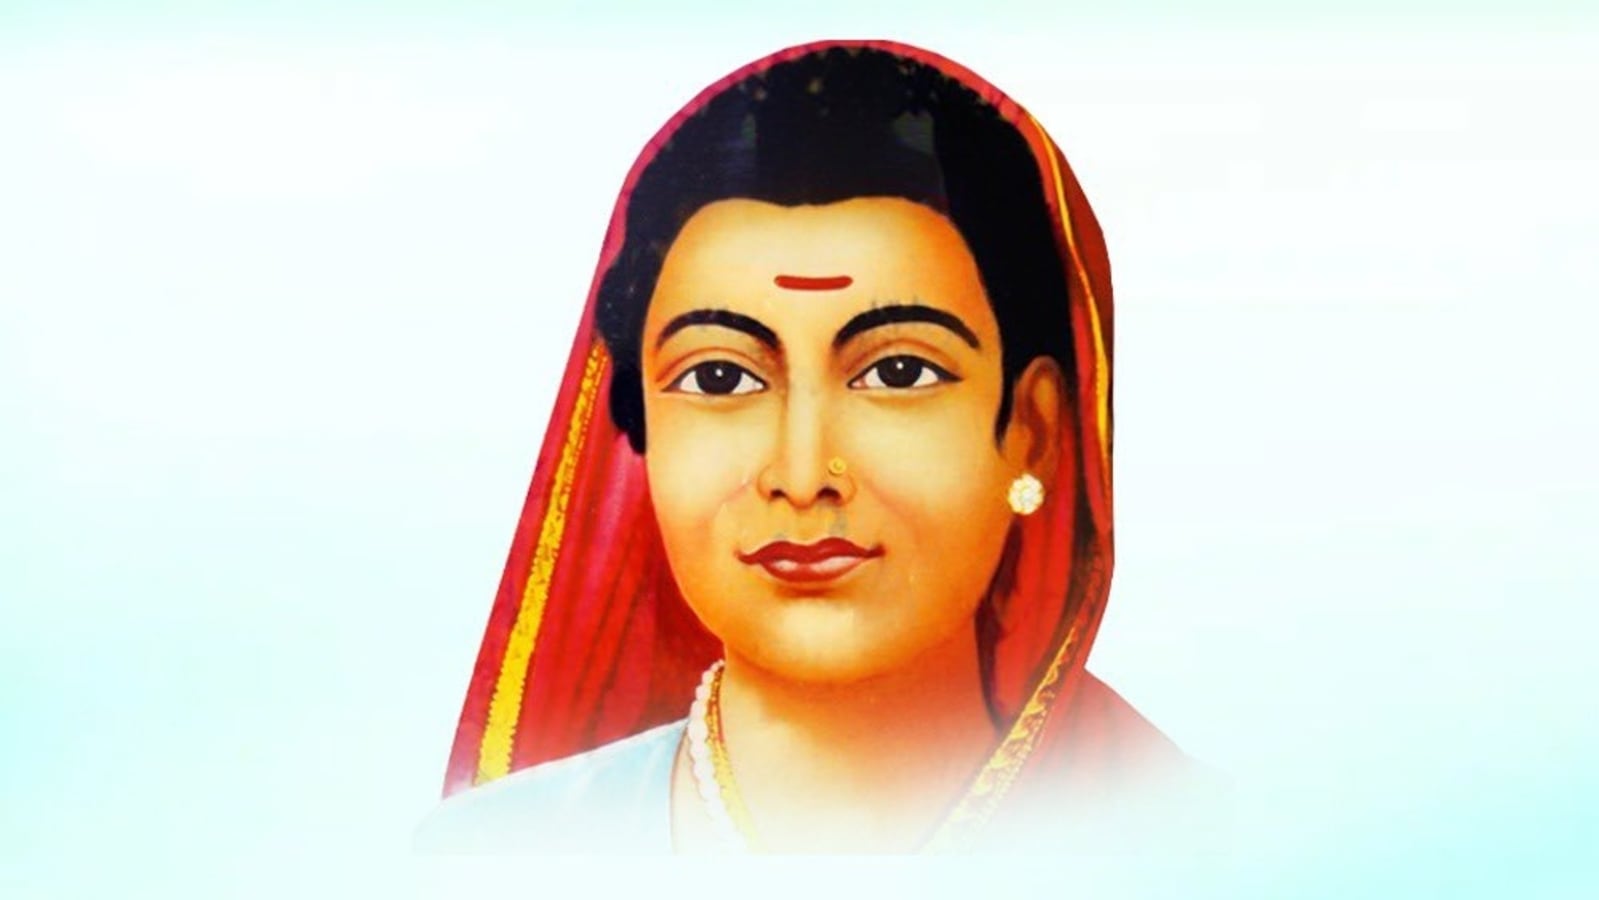 Savitribai Phule Images: A Spectacular Collection in Full 4K Resolution